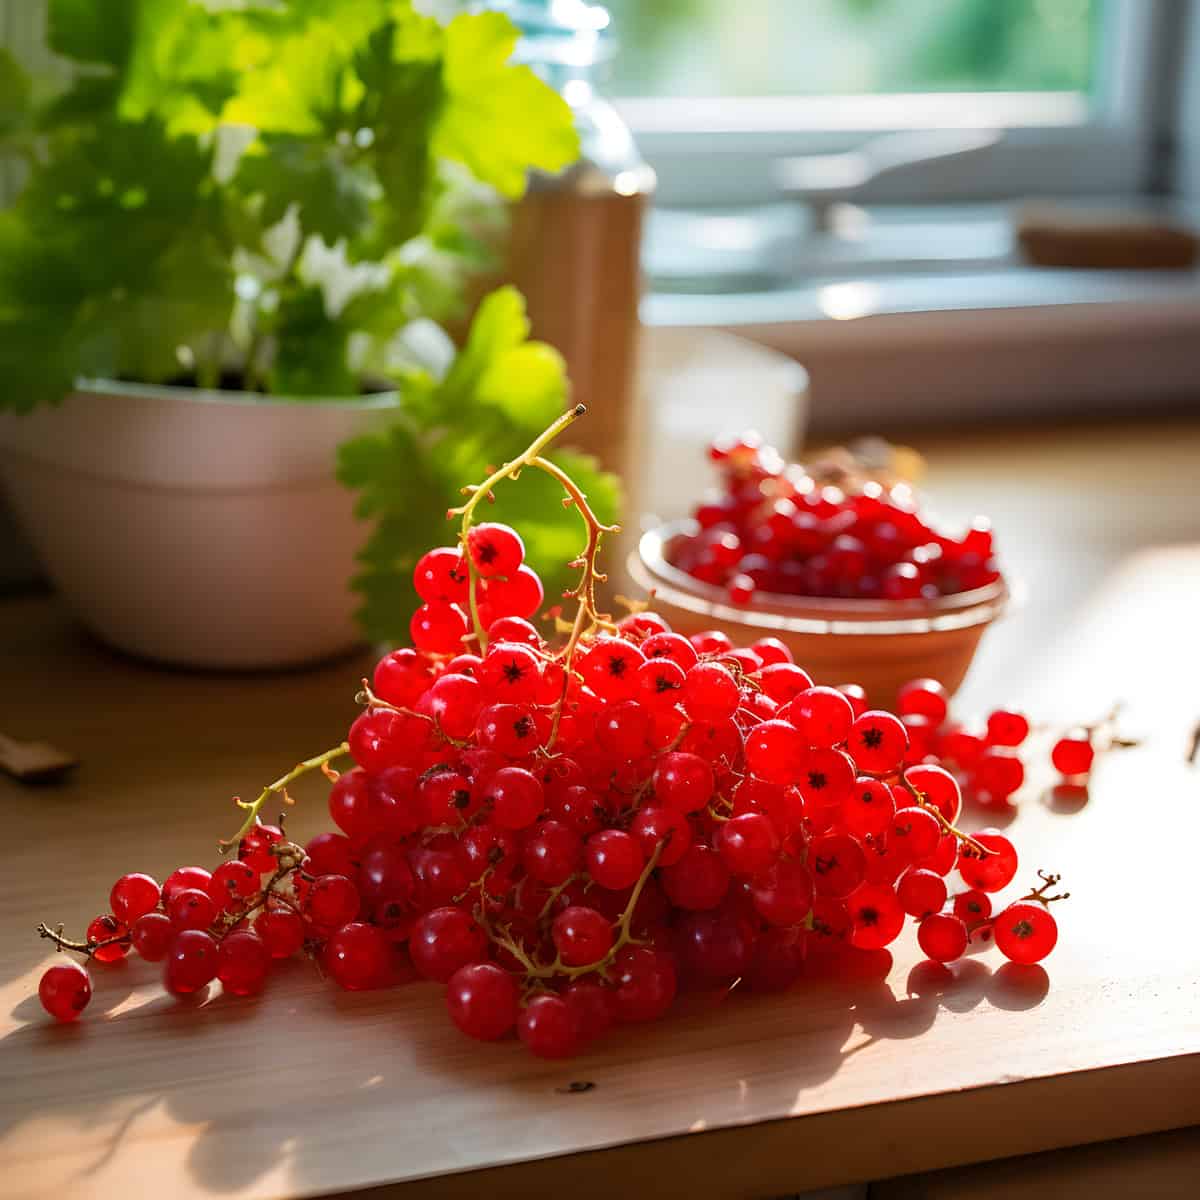 Red Currants on a kitchen counter